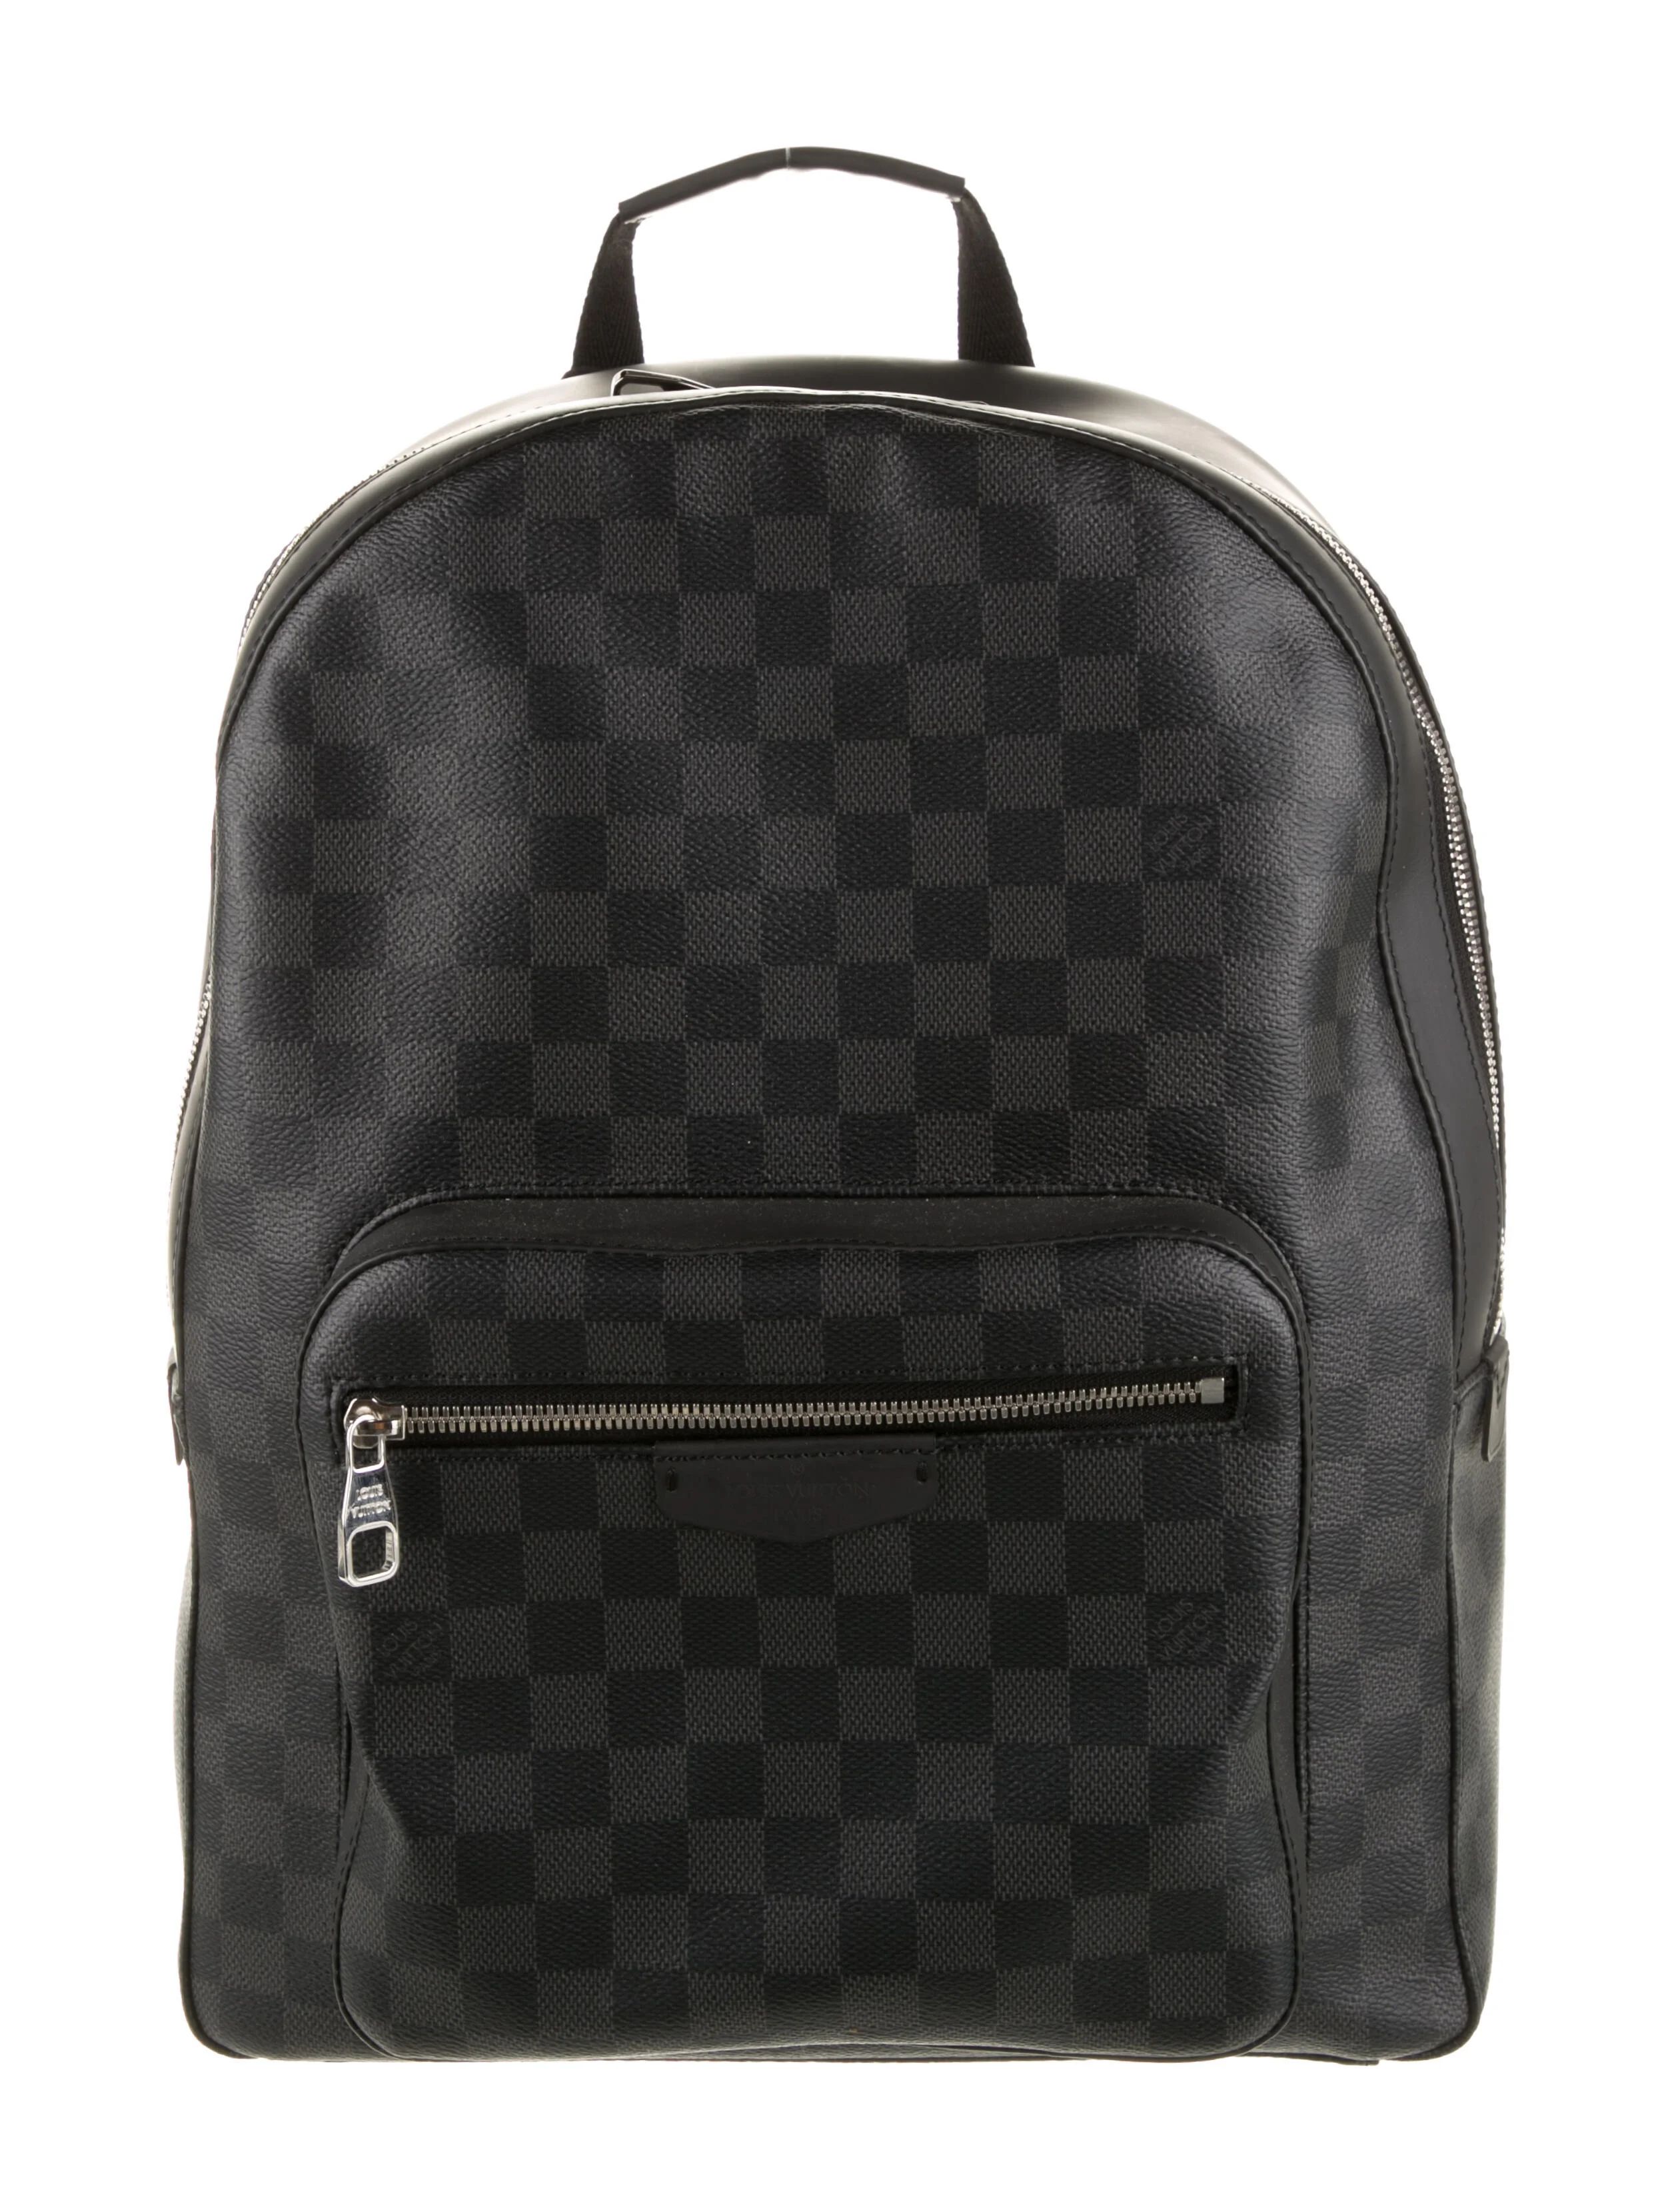 Damier Graphite Josh Backpack | The RealReal